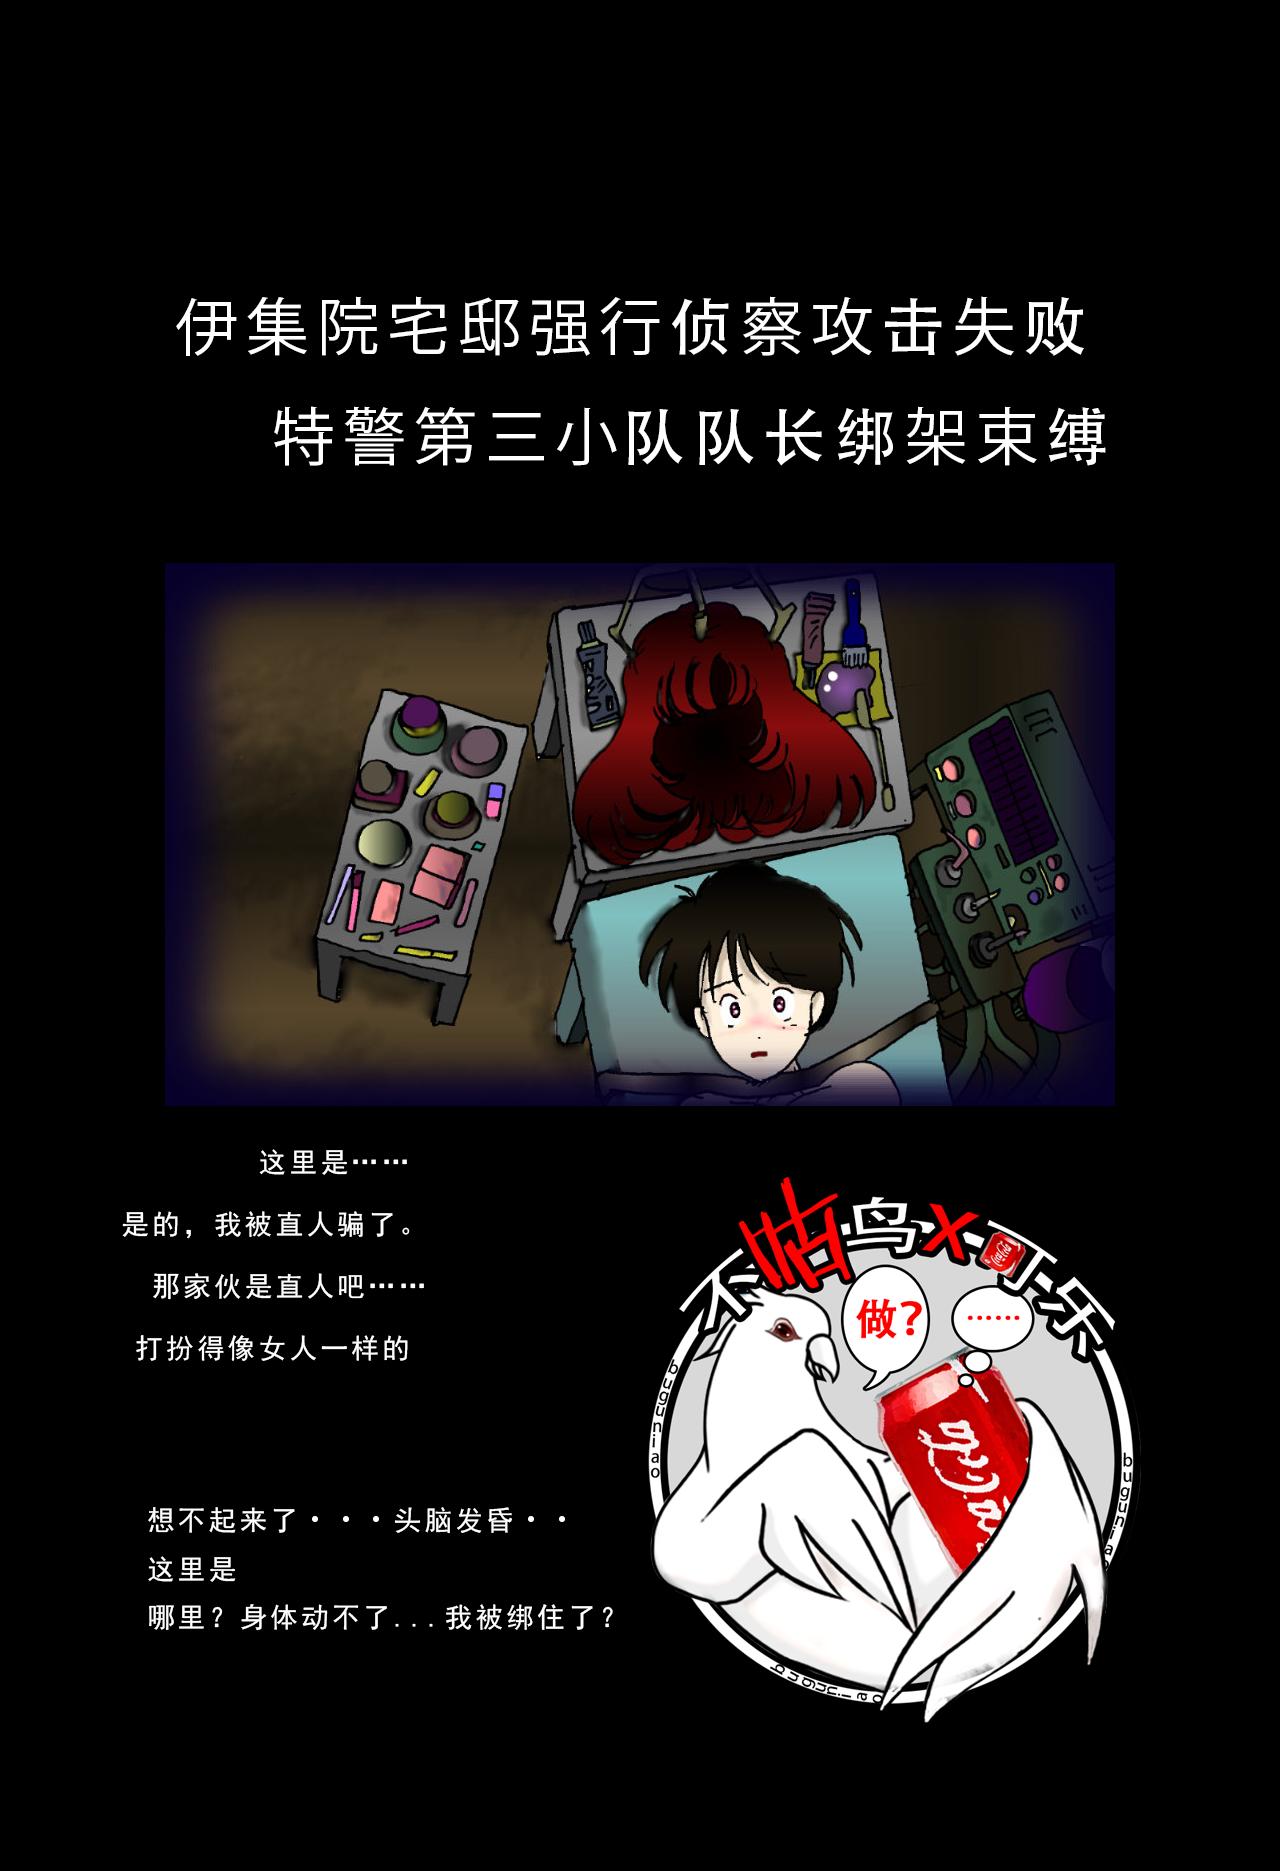 Special Police Third Platoon Captain Abduction Restraint Edition【chinese】 0